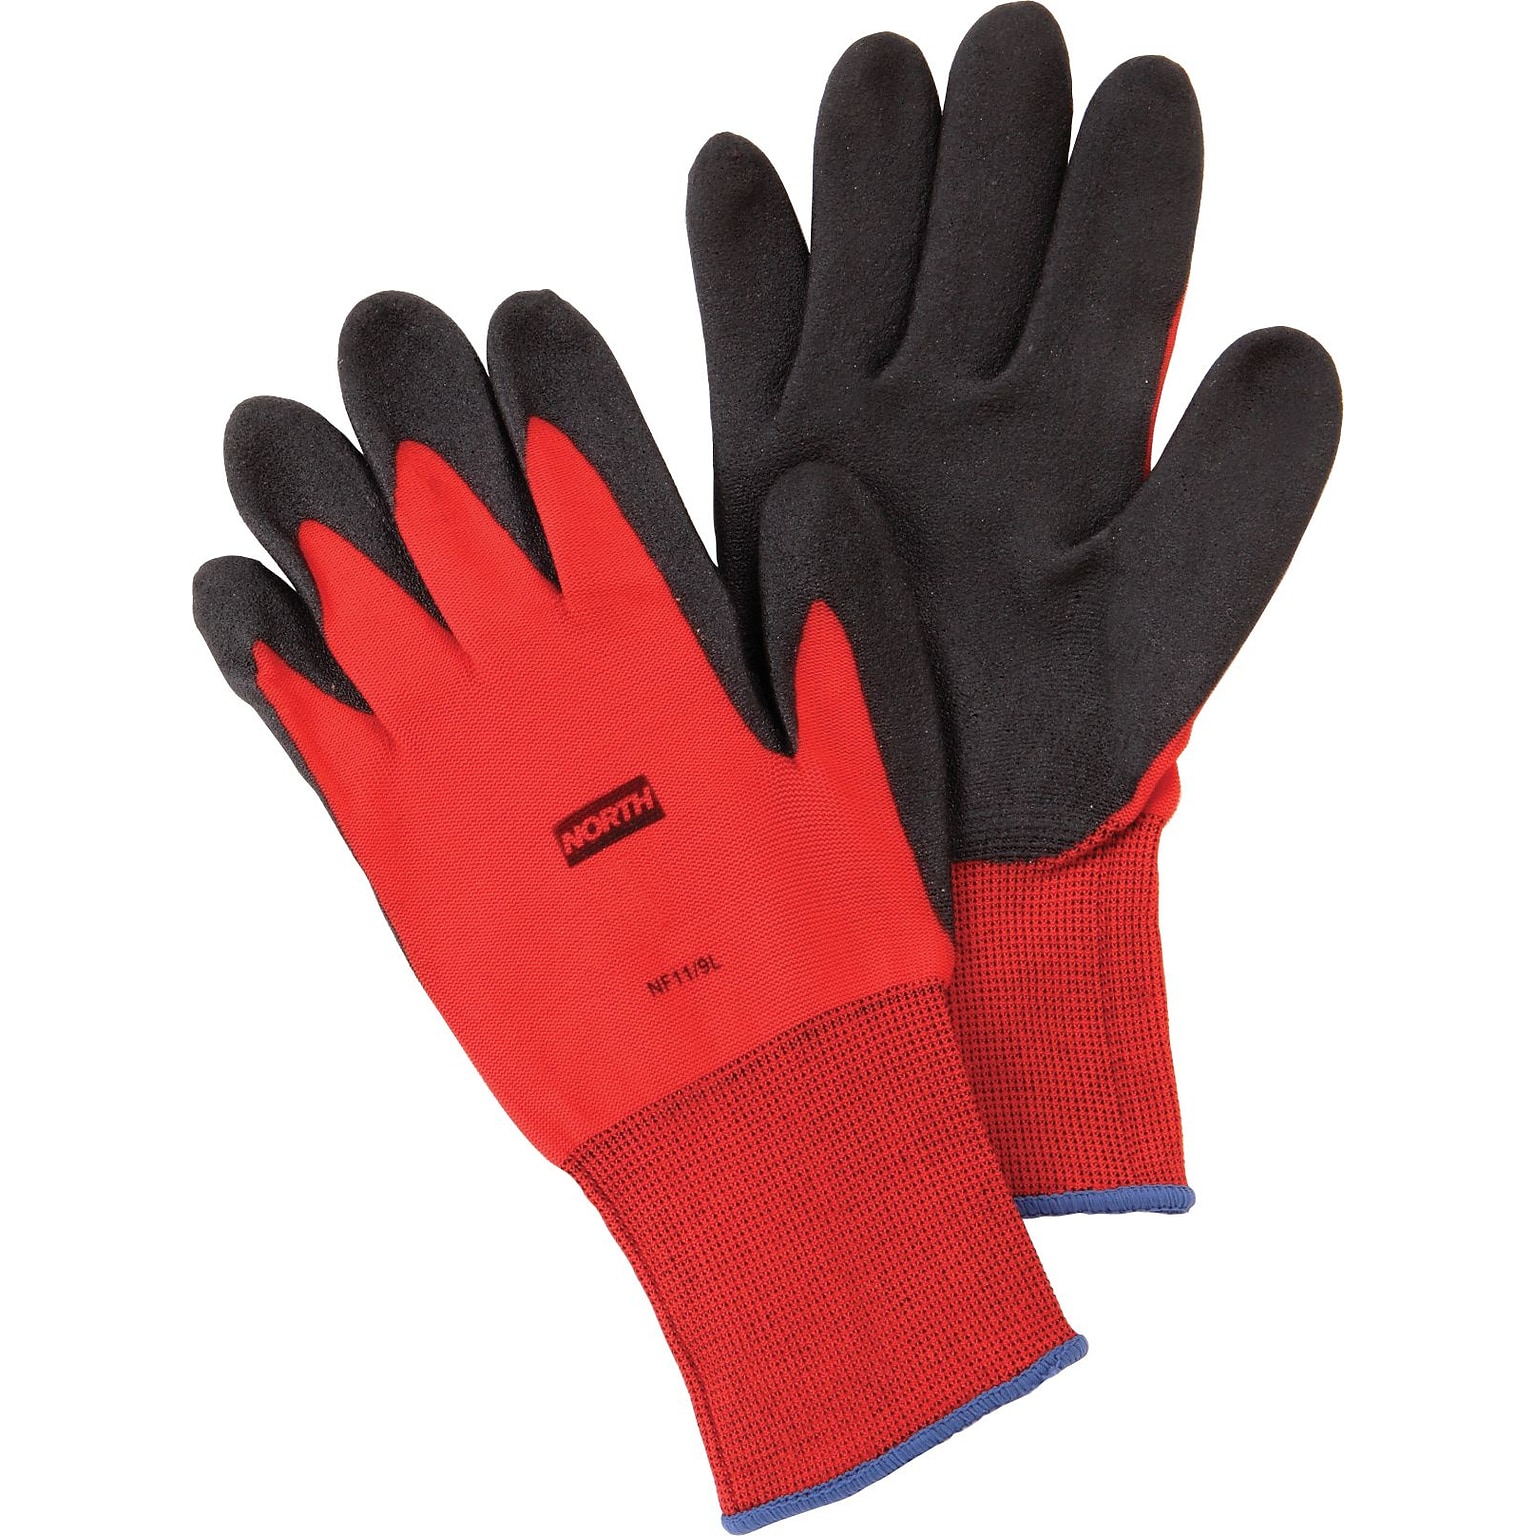 North Flex Red™ Coated Gloves, PVC, Knit-Wrist Cuff, Red/Black, X-Large, 12 Pairs (NF11/10XL)